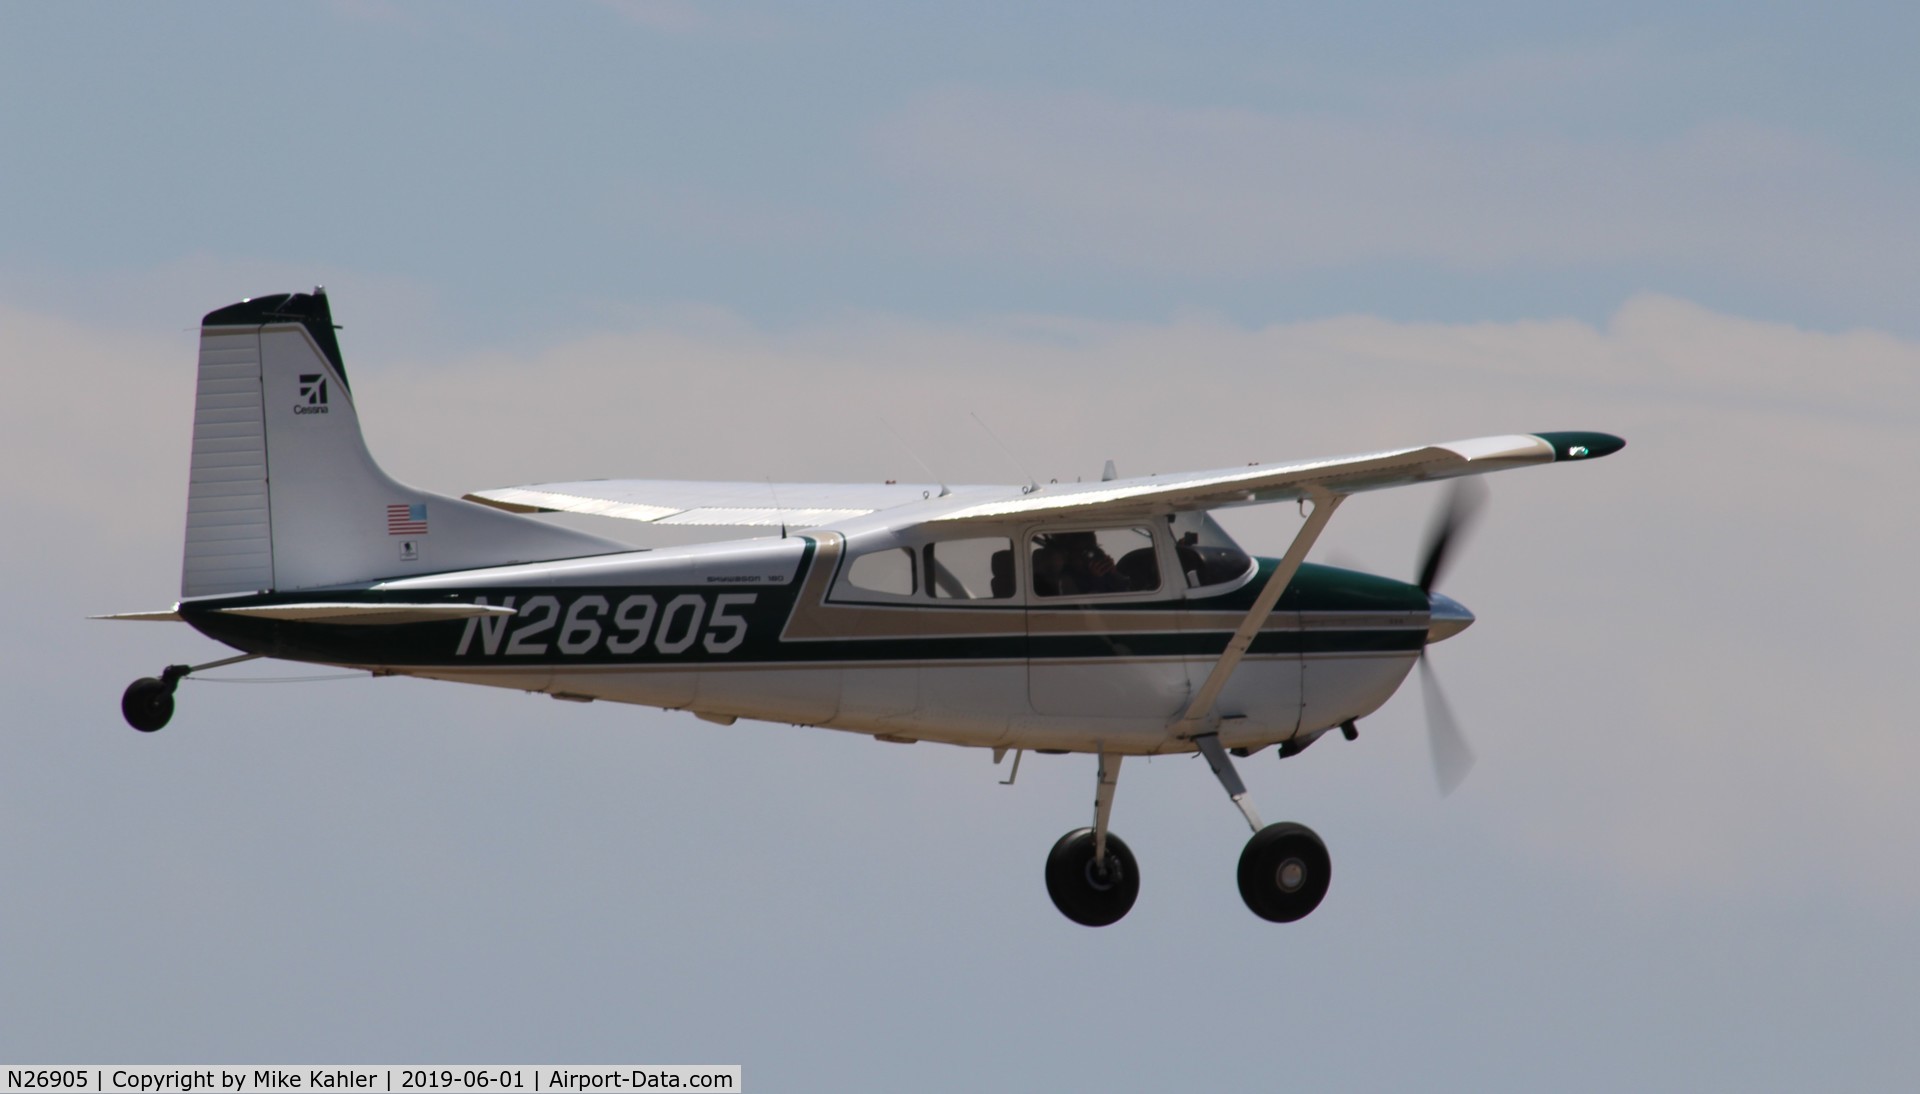 N26905, Cessna 180 C/N 18051354, Enroute to Penny's Airfield